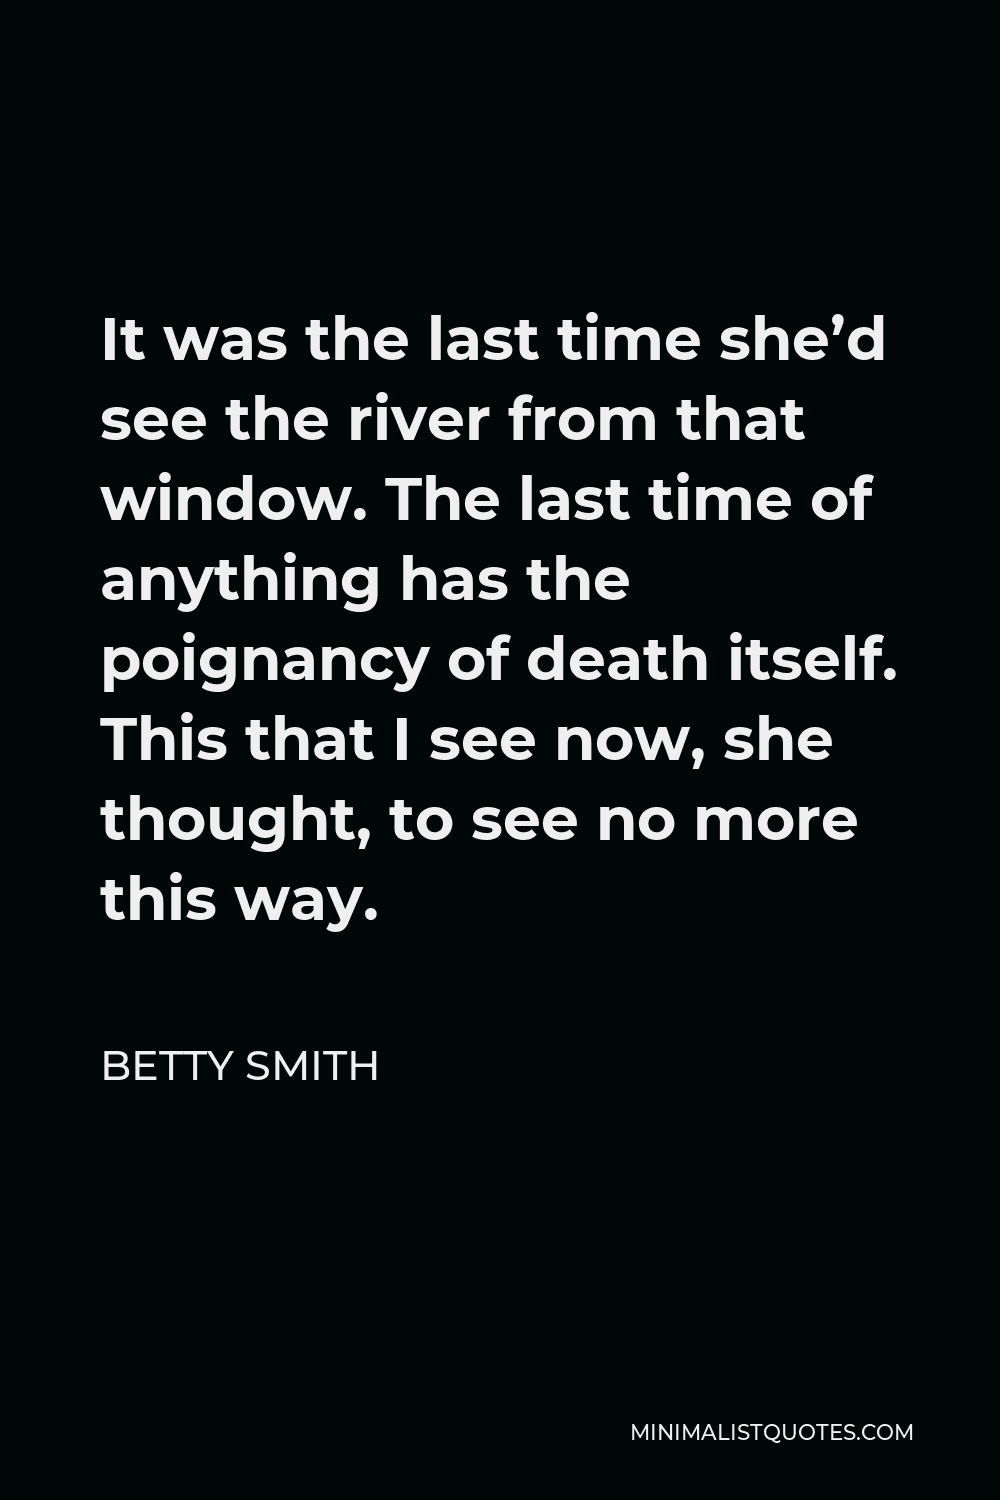 Betty Smith Quote - It was the last time she’d see the river from that window. The last time of anything has the poignancy of death itself. This that I see now, she thought, to see no more this way.